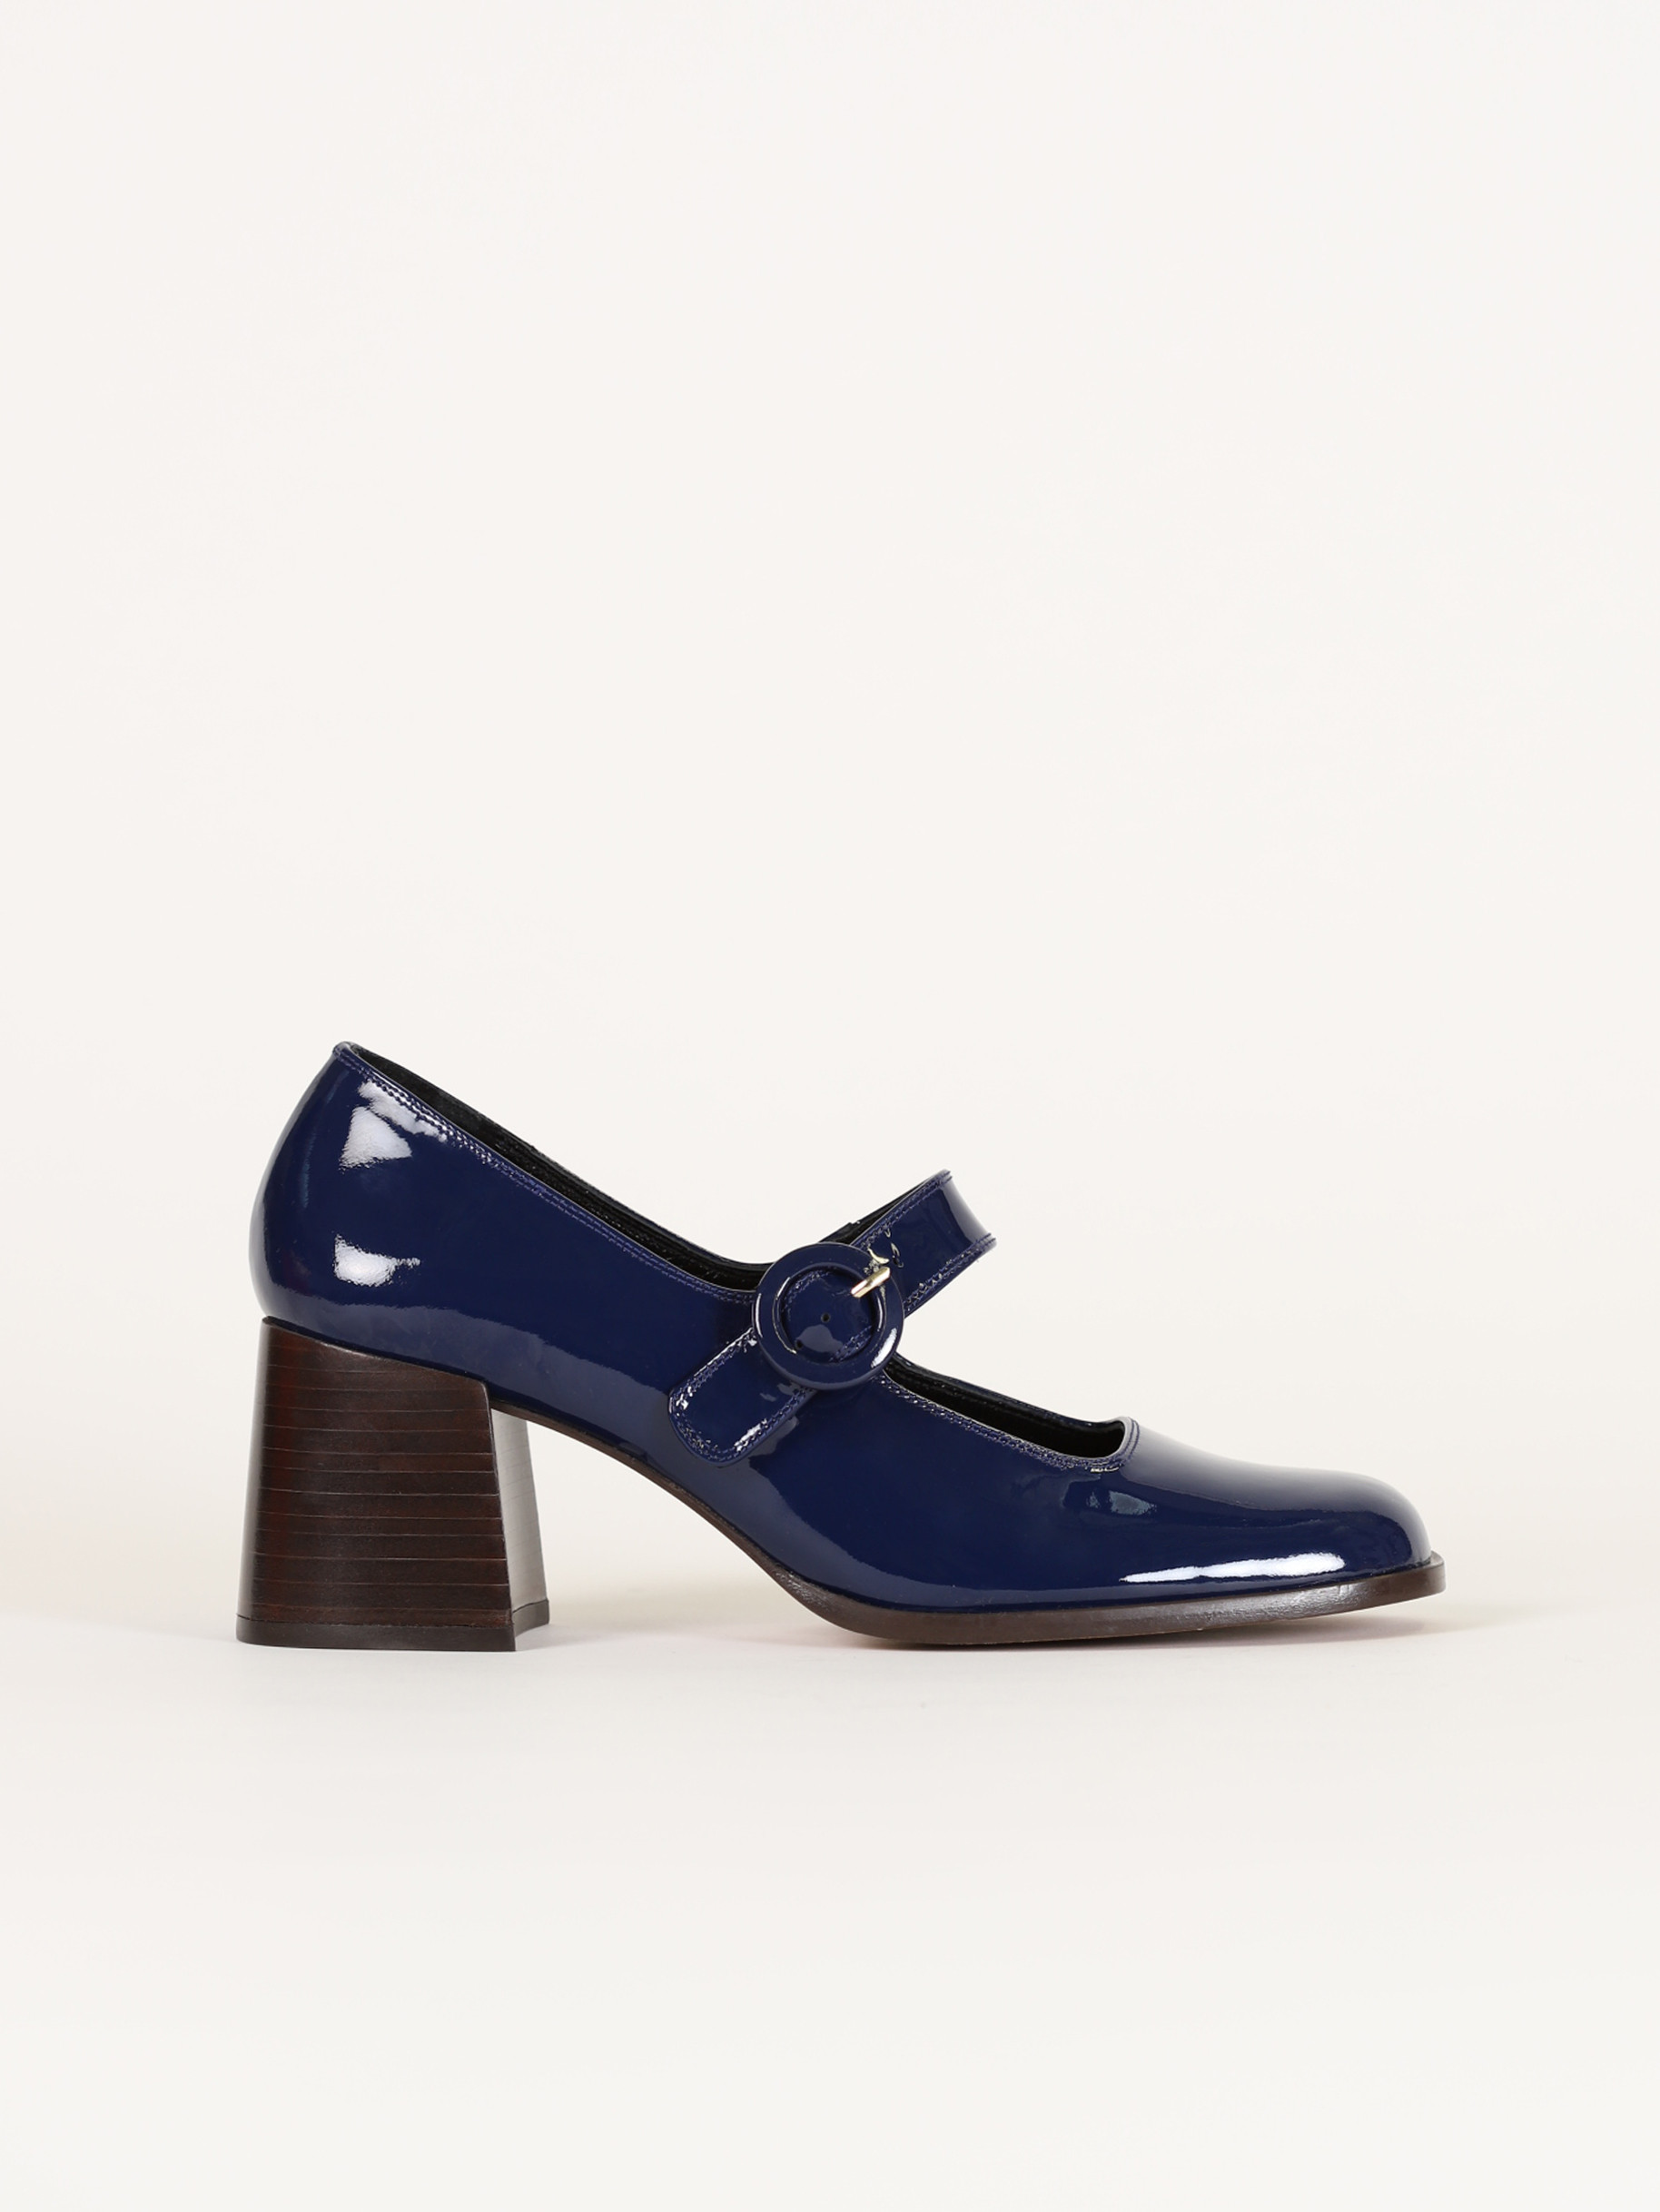 Blue patent leather Mary Janes